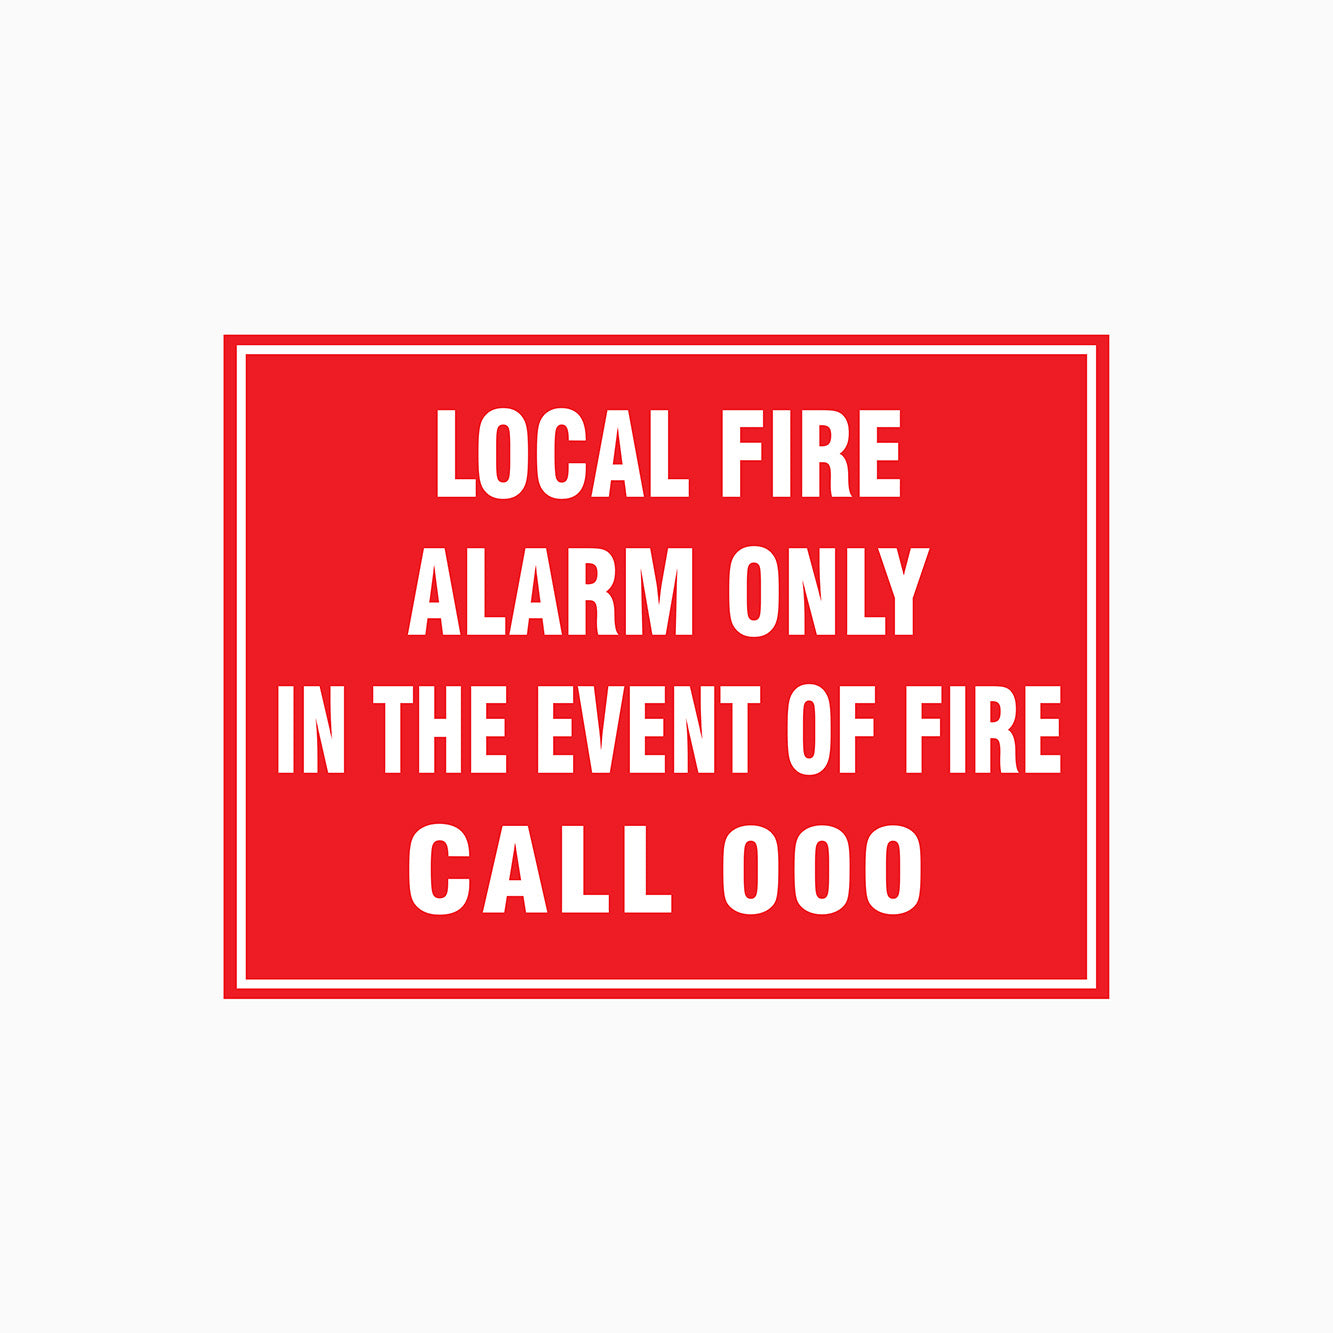 LOCAL FIRE ALARM ONLY IN THE EVENT OF FIRE CALL 000 SIGN